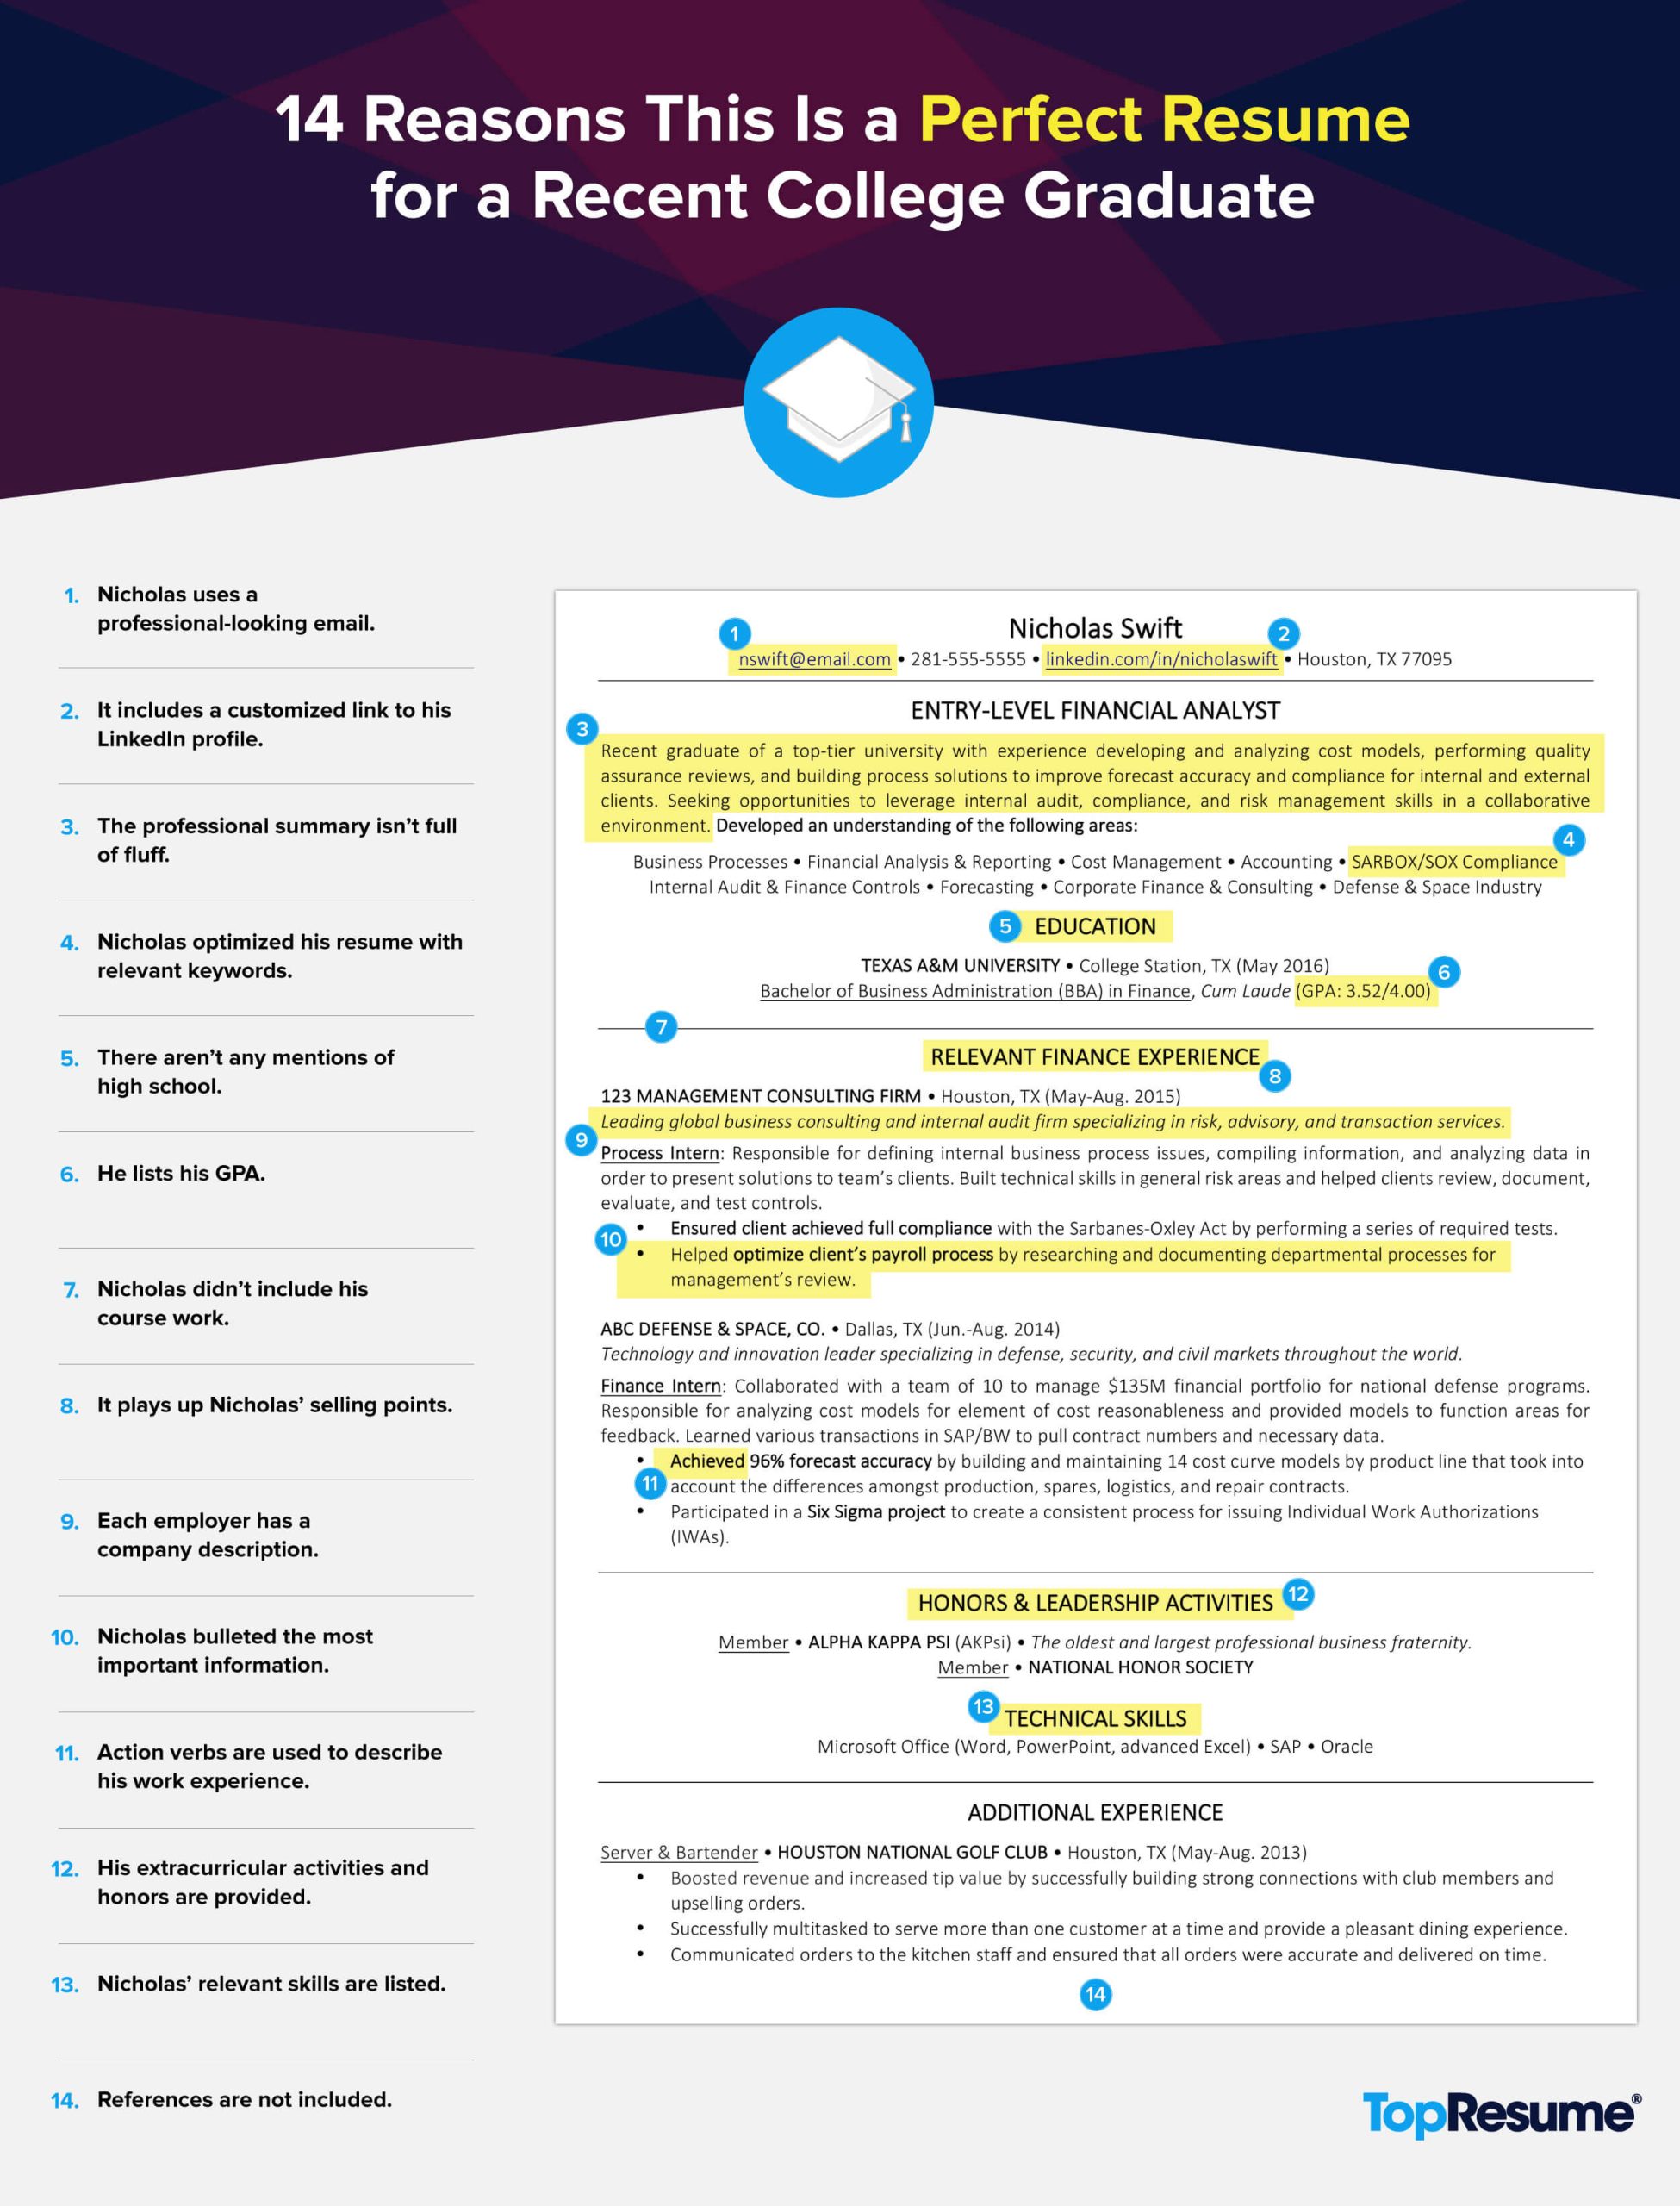 Sample Summary for College Student Resume 14 Reasons This is A Perfect Recent College Graduate Resume …